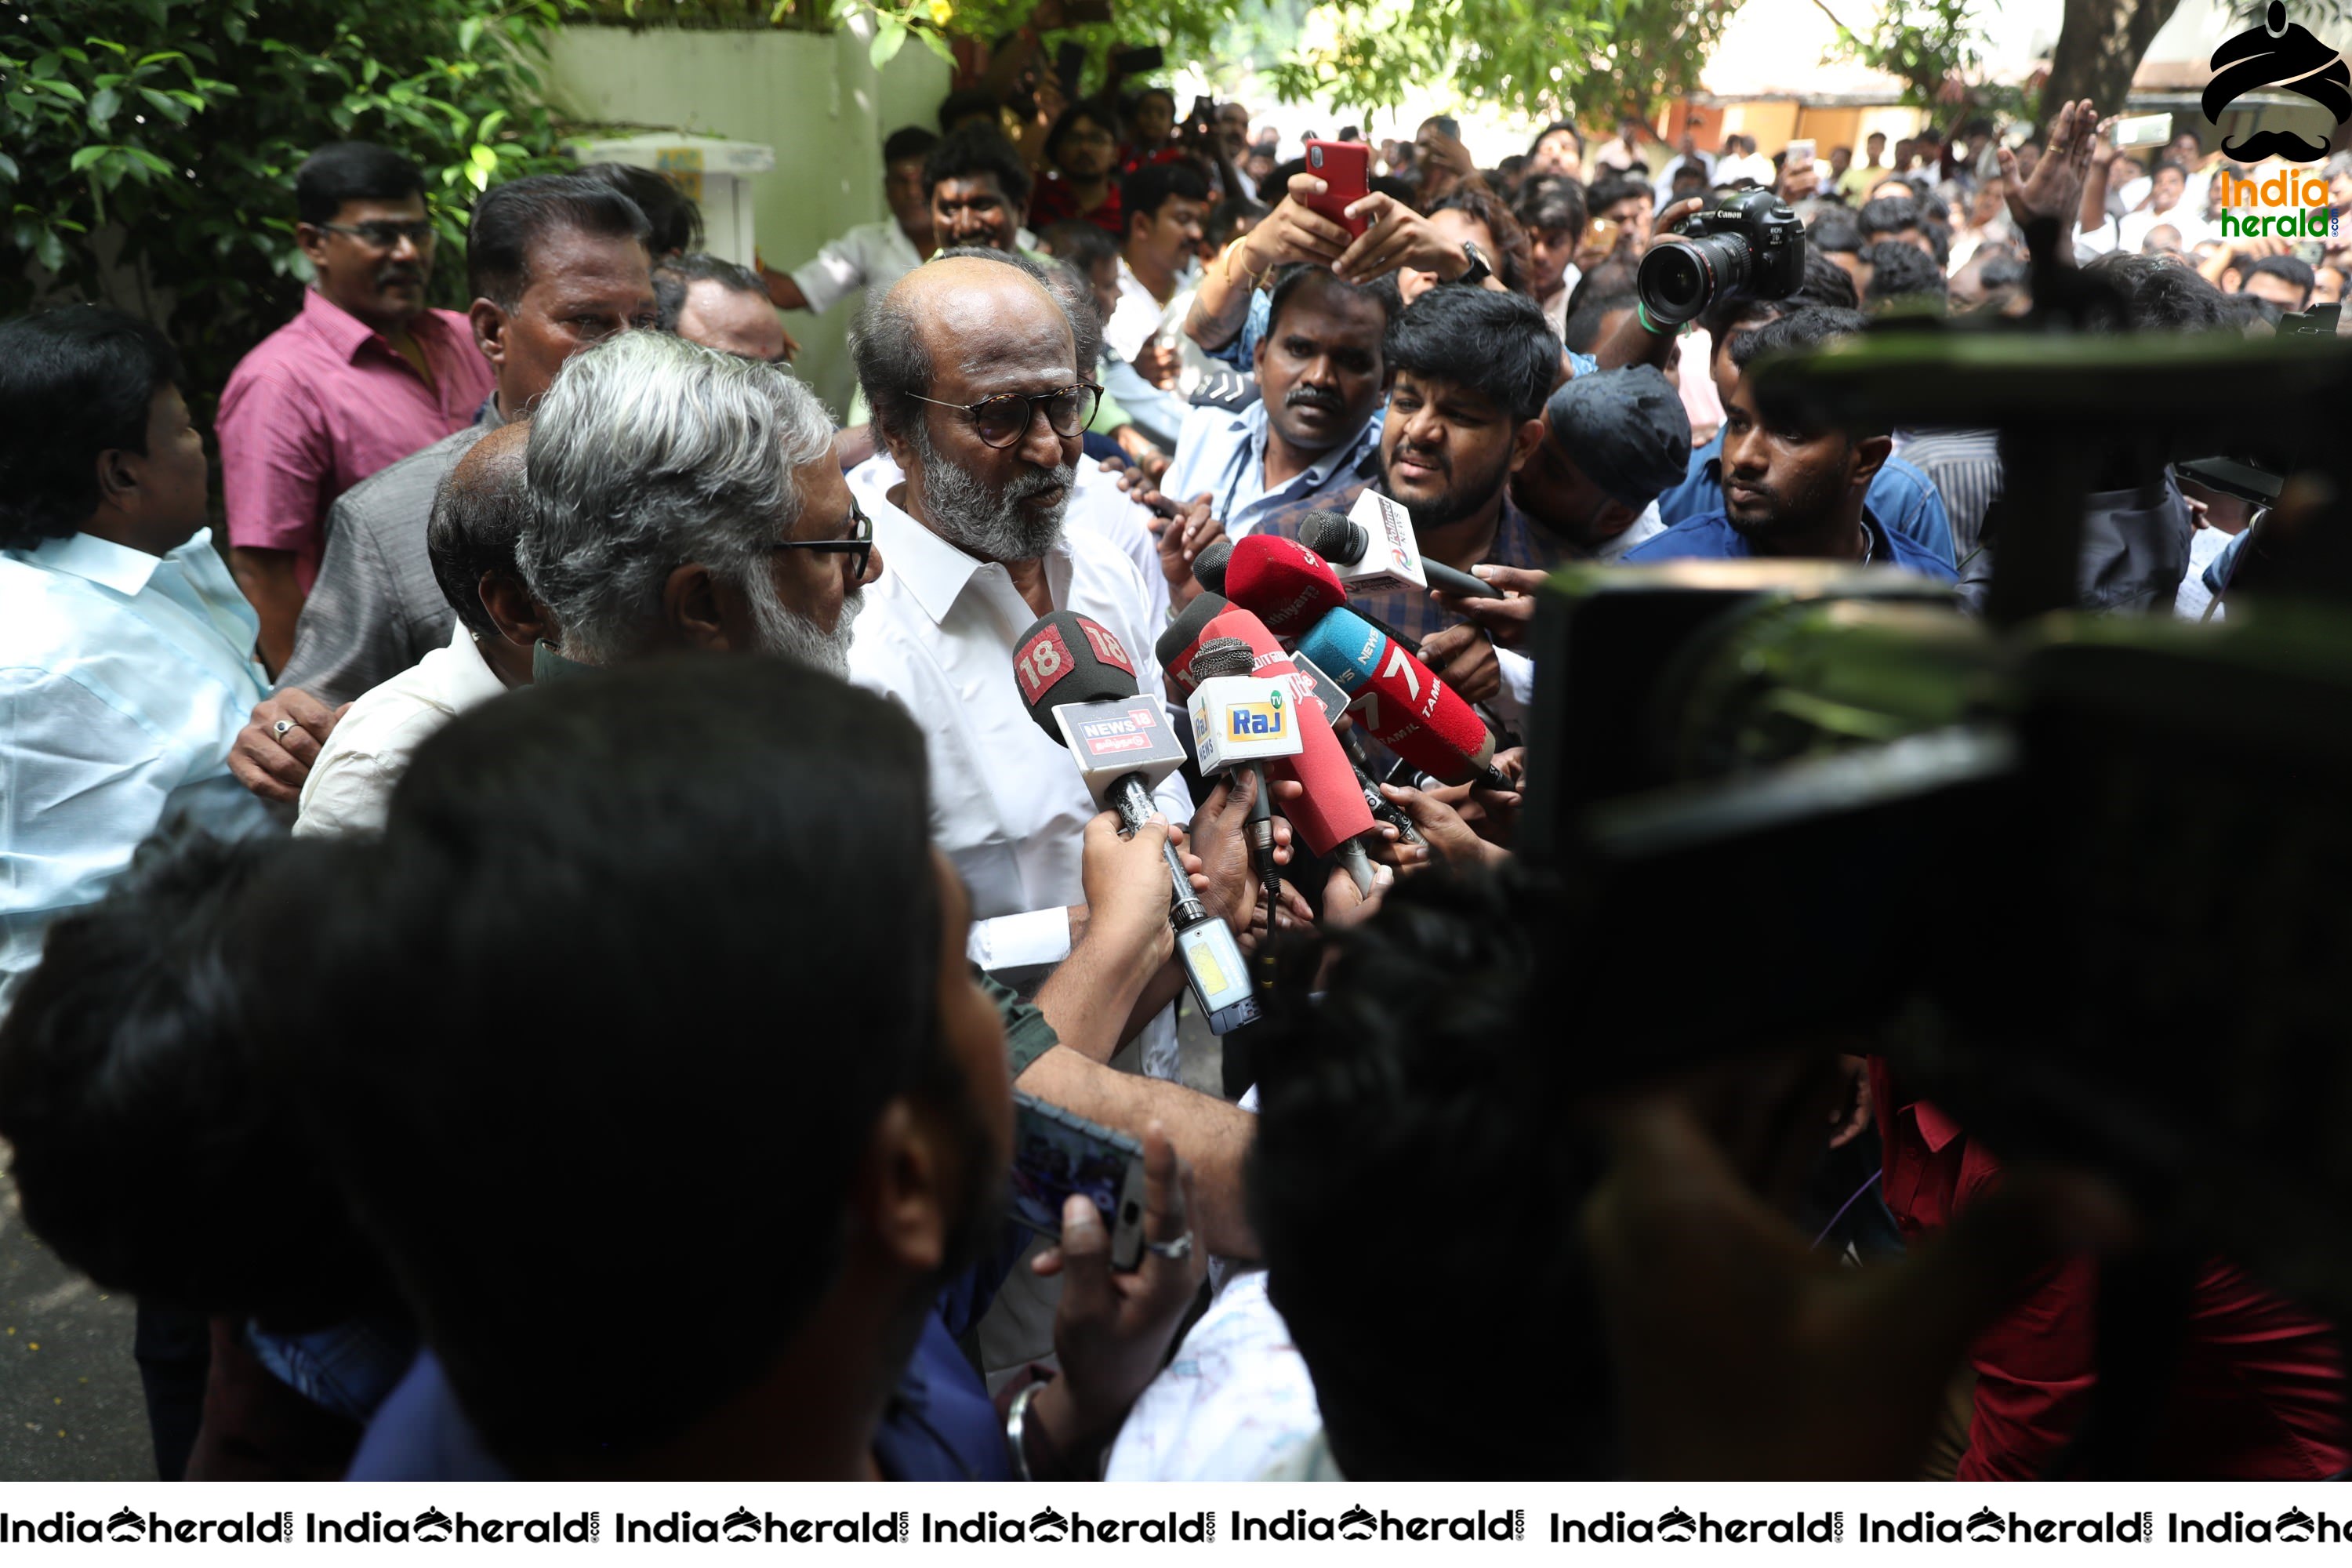 Super Star Rajinikanth Meets the Fans and Media Outside His Residence